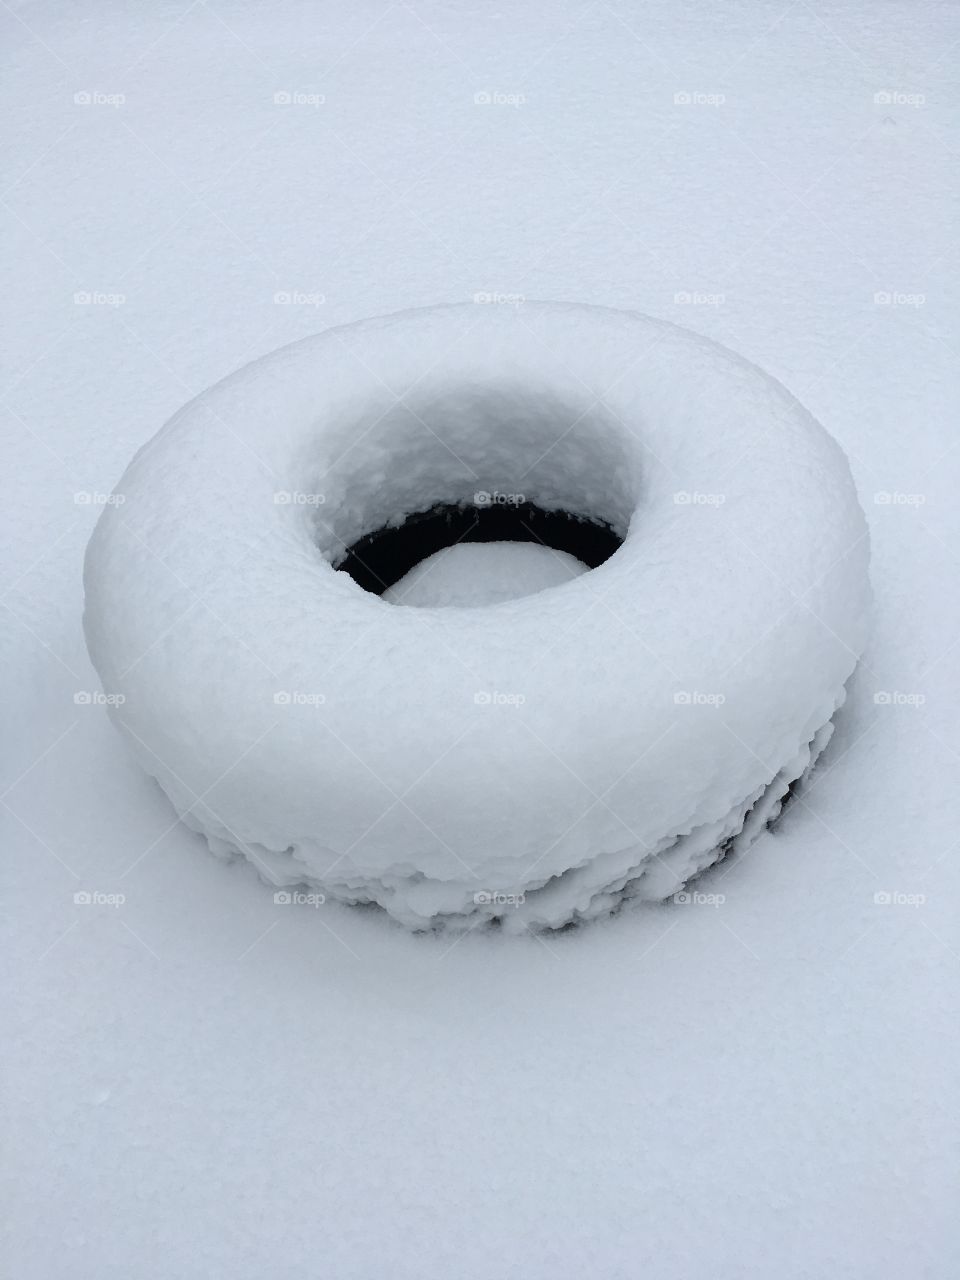 There’s a vanilla-frosted donut in my backyard!